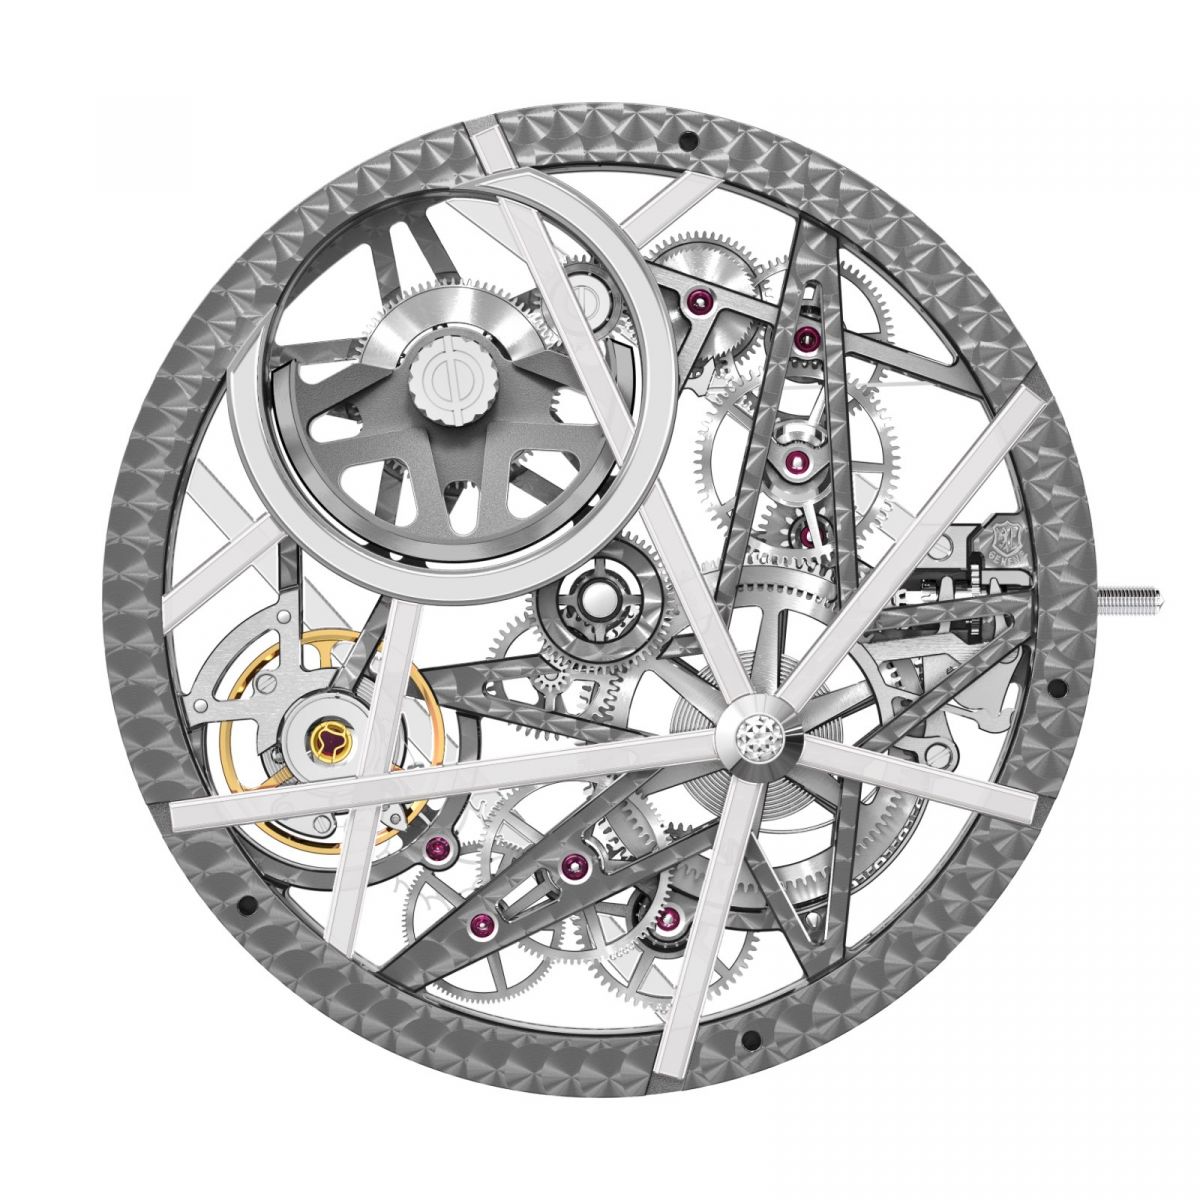 Roger Dubuis, watch